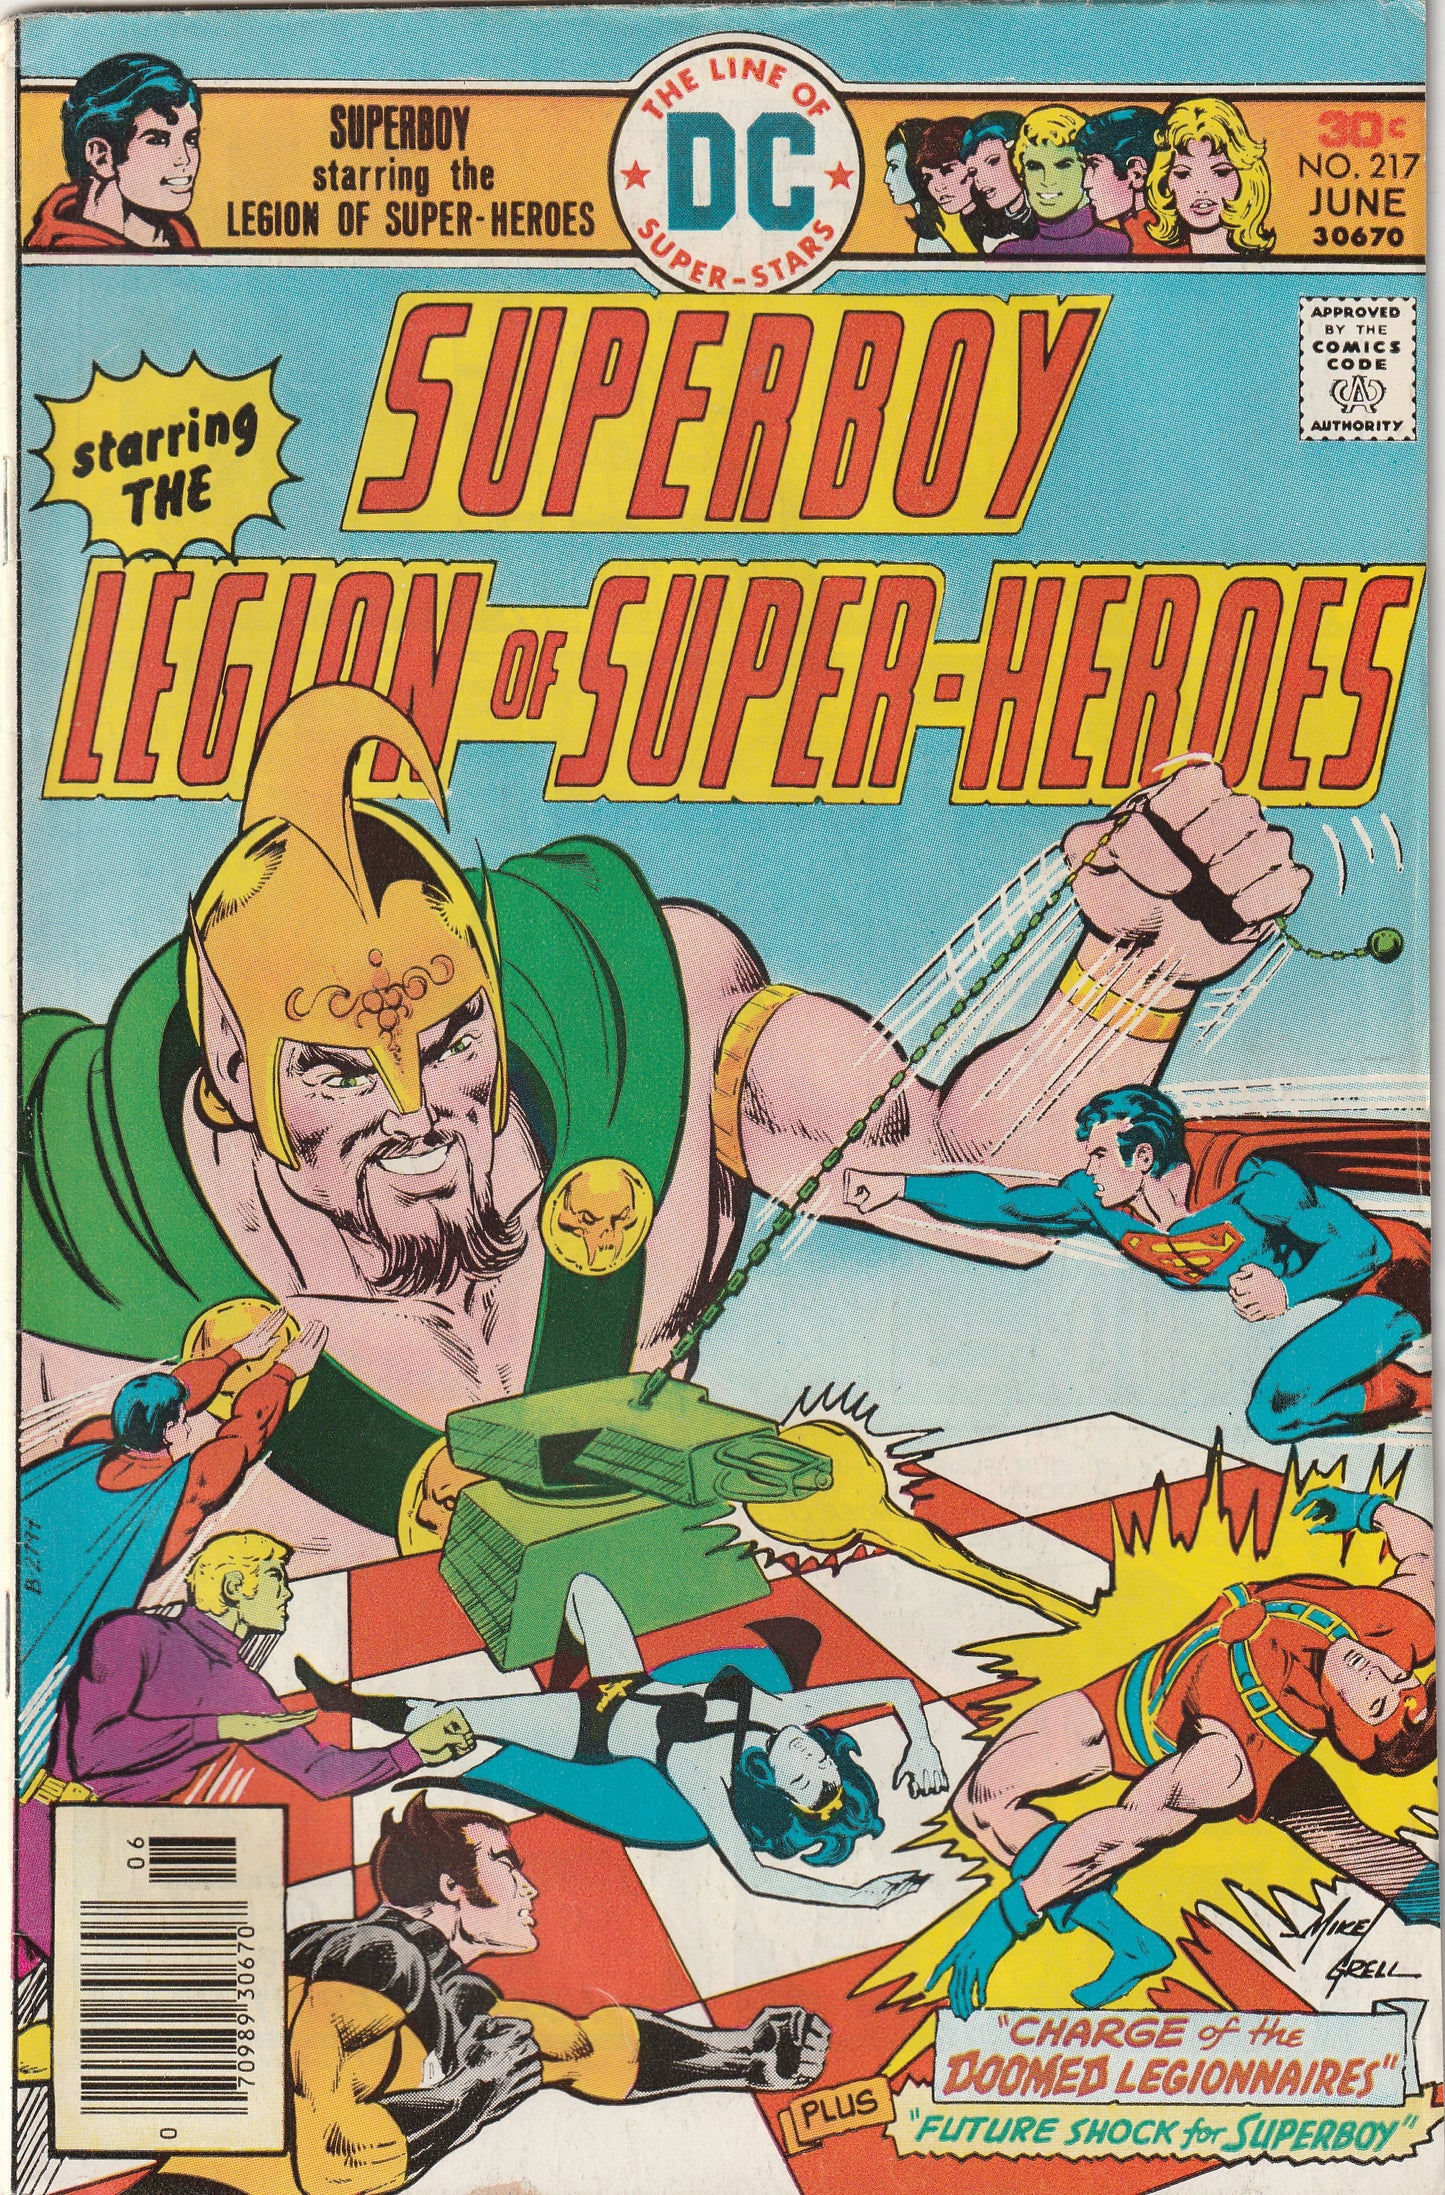 Superboy #217 (1976) - Starring the Legion of Super-Heroes